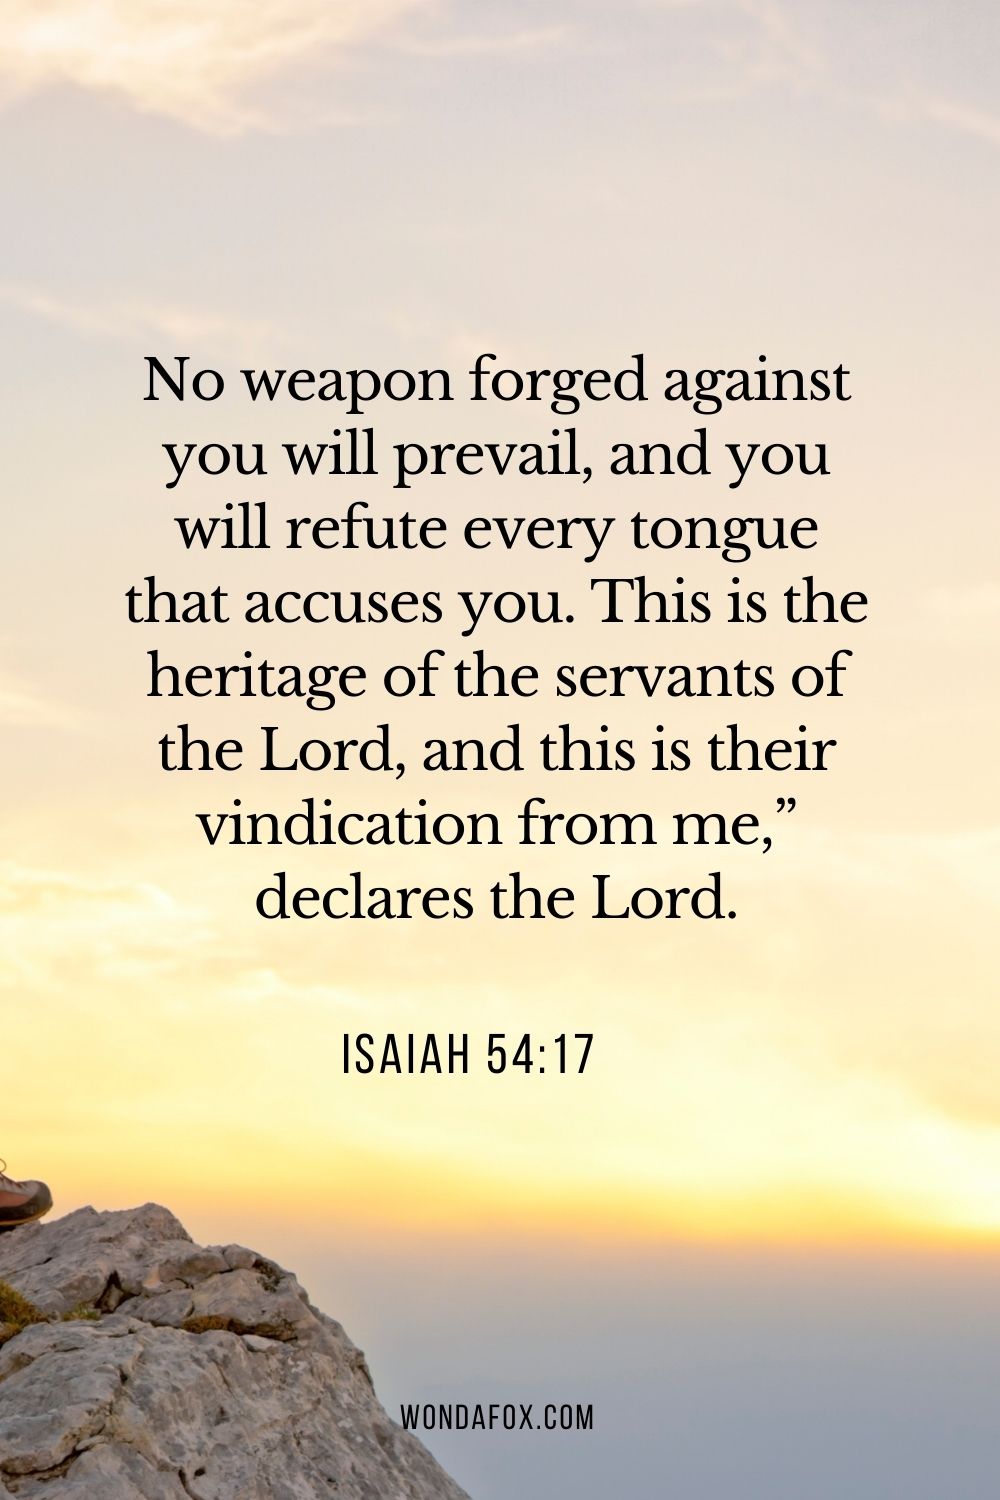 No weapon forged against you will prevail, and you will refute every tongue that accuses you. This is the heritage of the servants of the Lord, and this is their vindication from me,” declares the Lord.